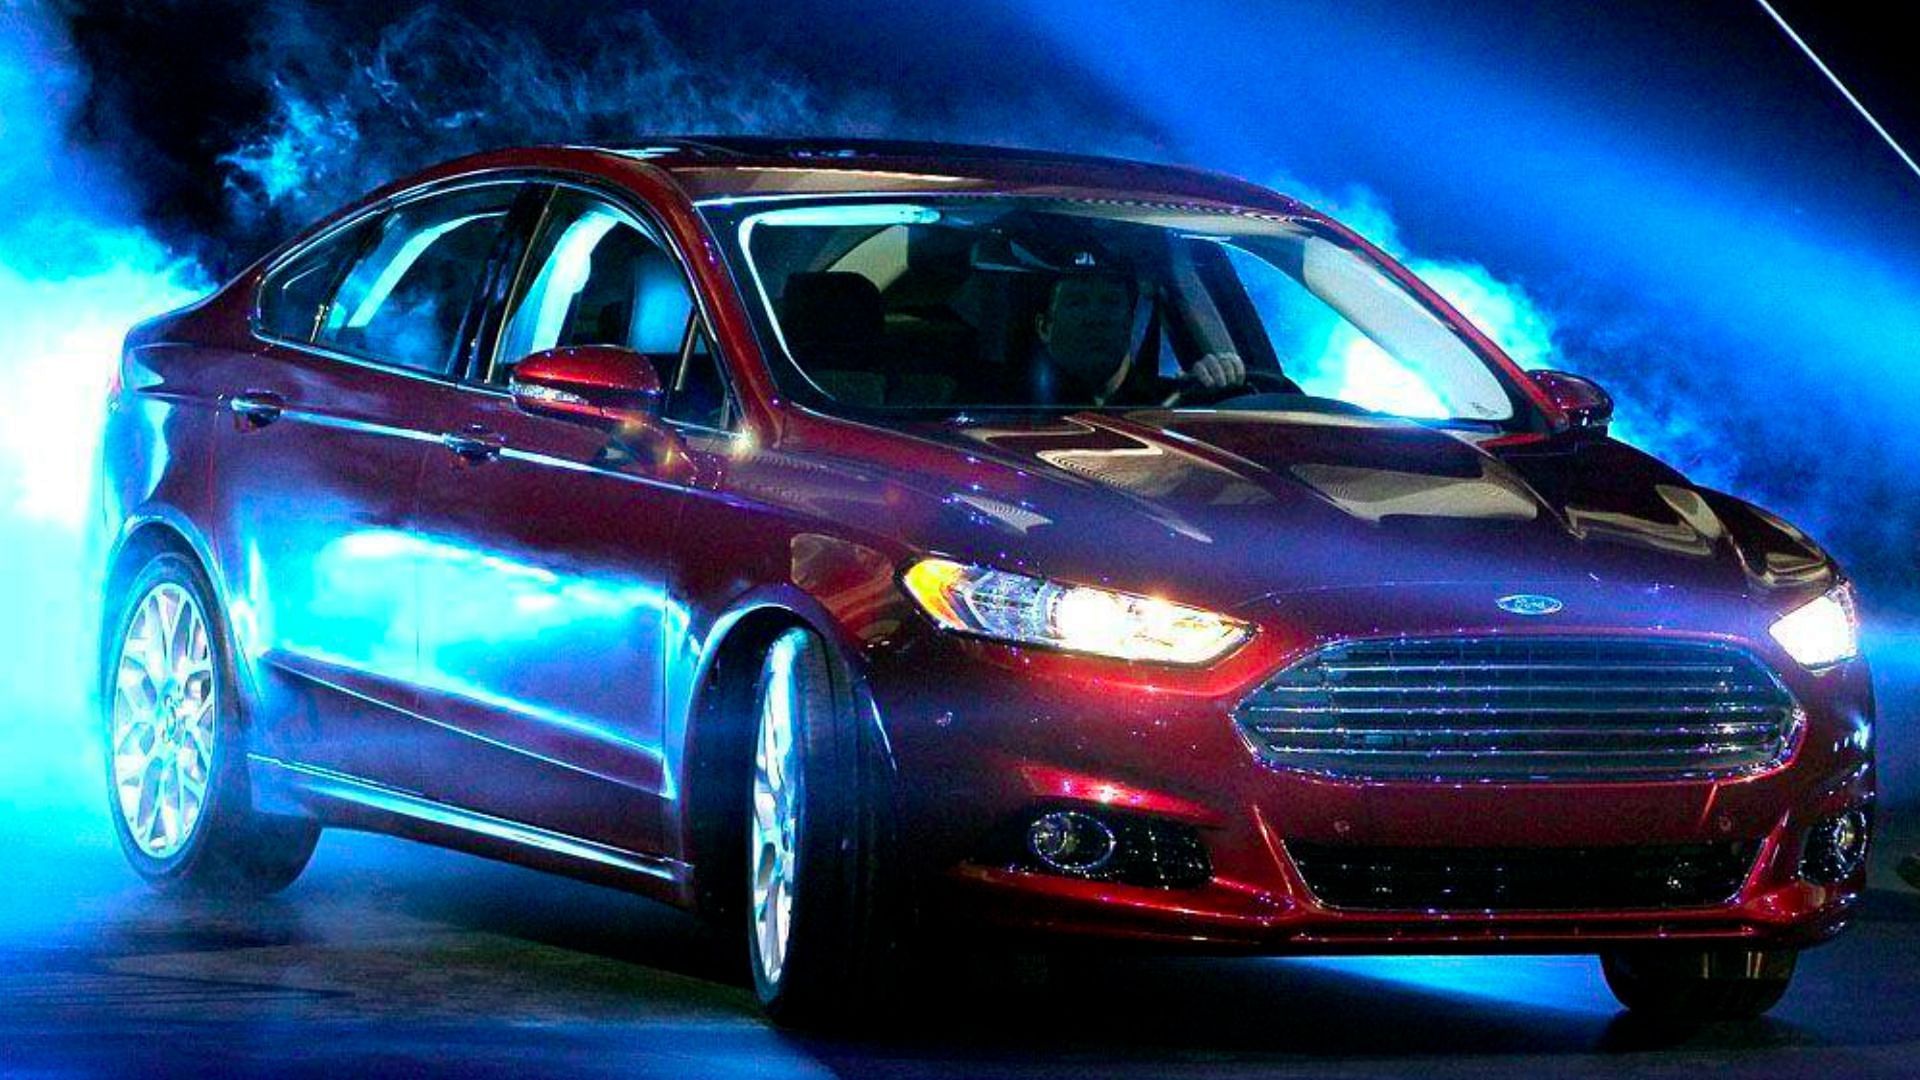 Ford Fusion and Lincoln MKZ sedans are being recalled over a design flaw that could potentially increase the risk of a crash (Image via Scott Olson/Getty Images)